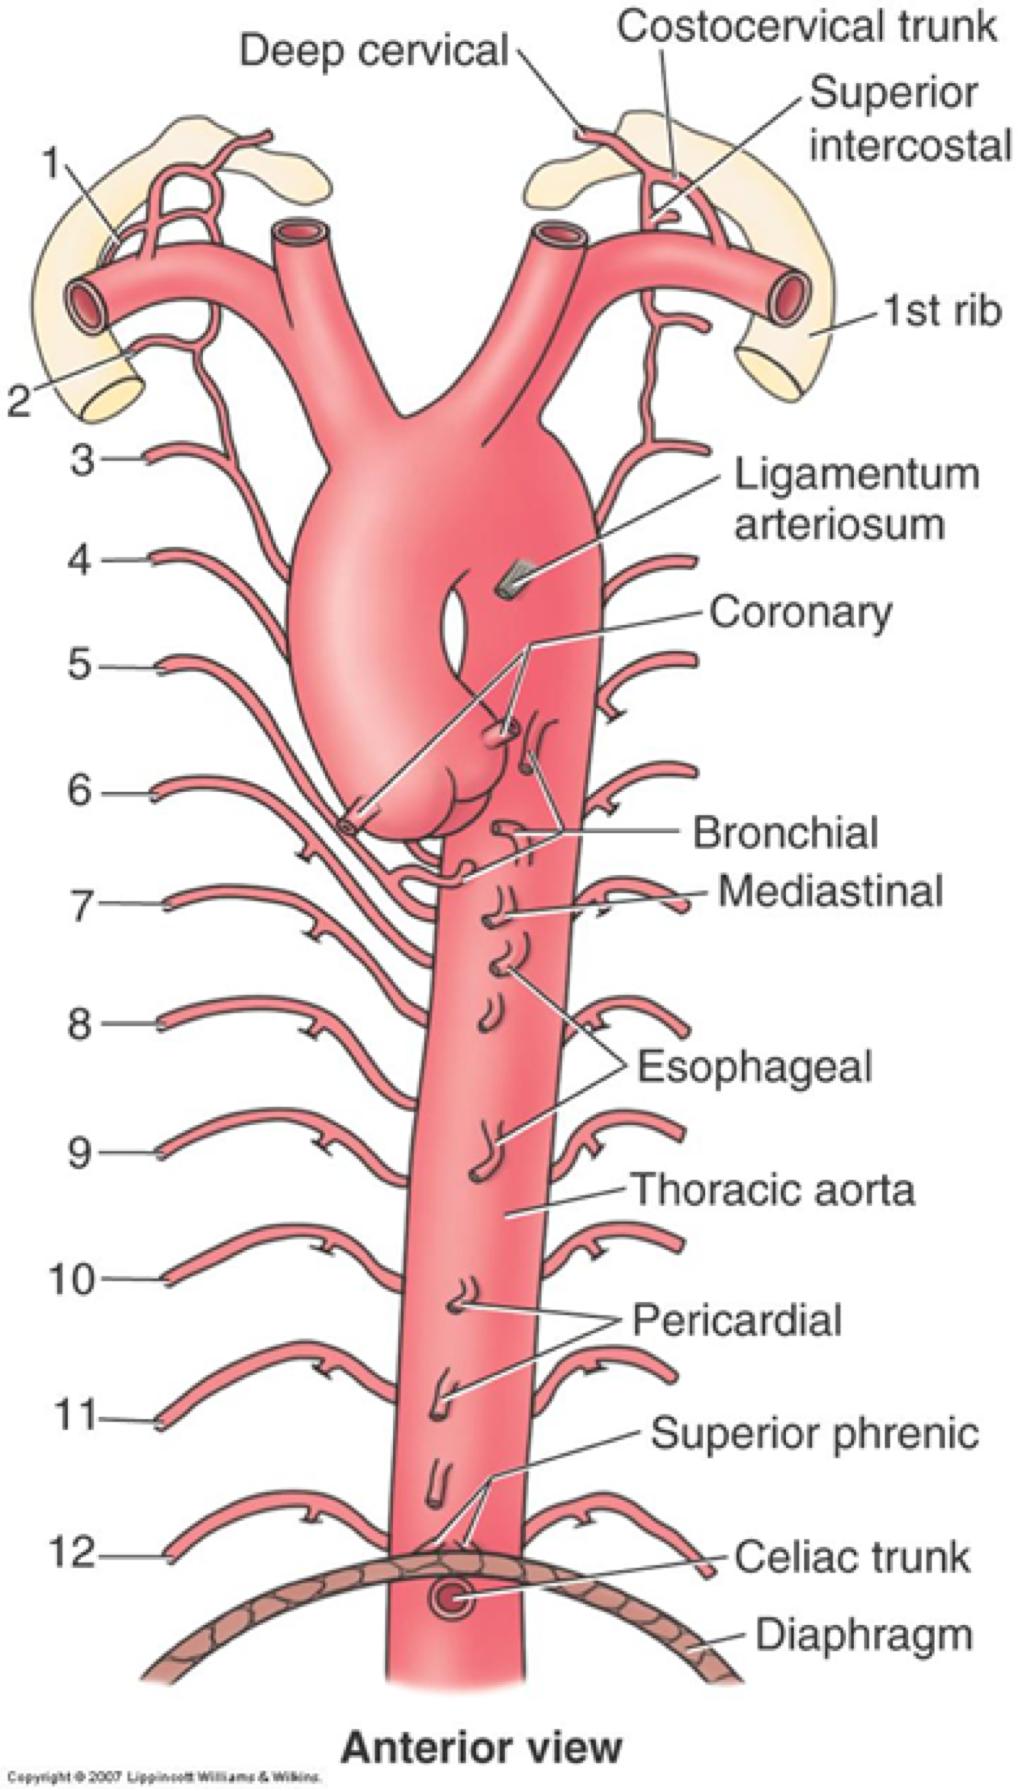 MAJOR ARTERIES: THORACIC AORTA The thoracic aorta supplies blood to arteries in the chest cavity.